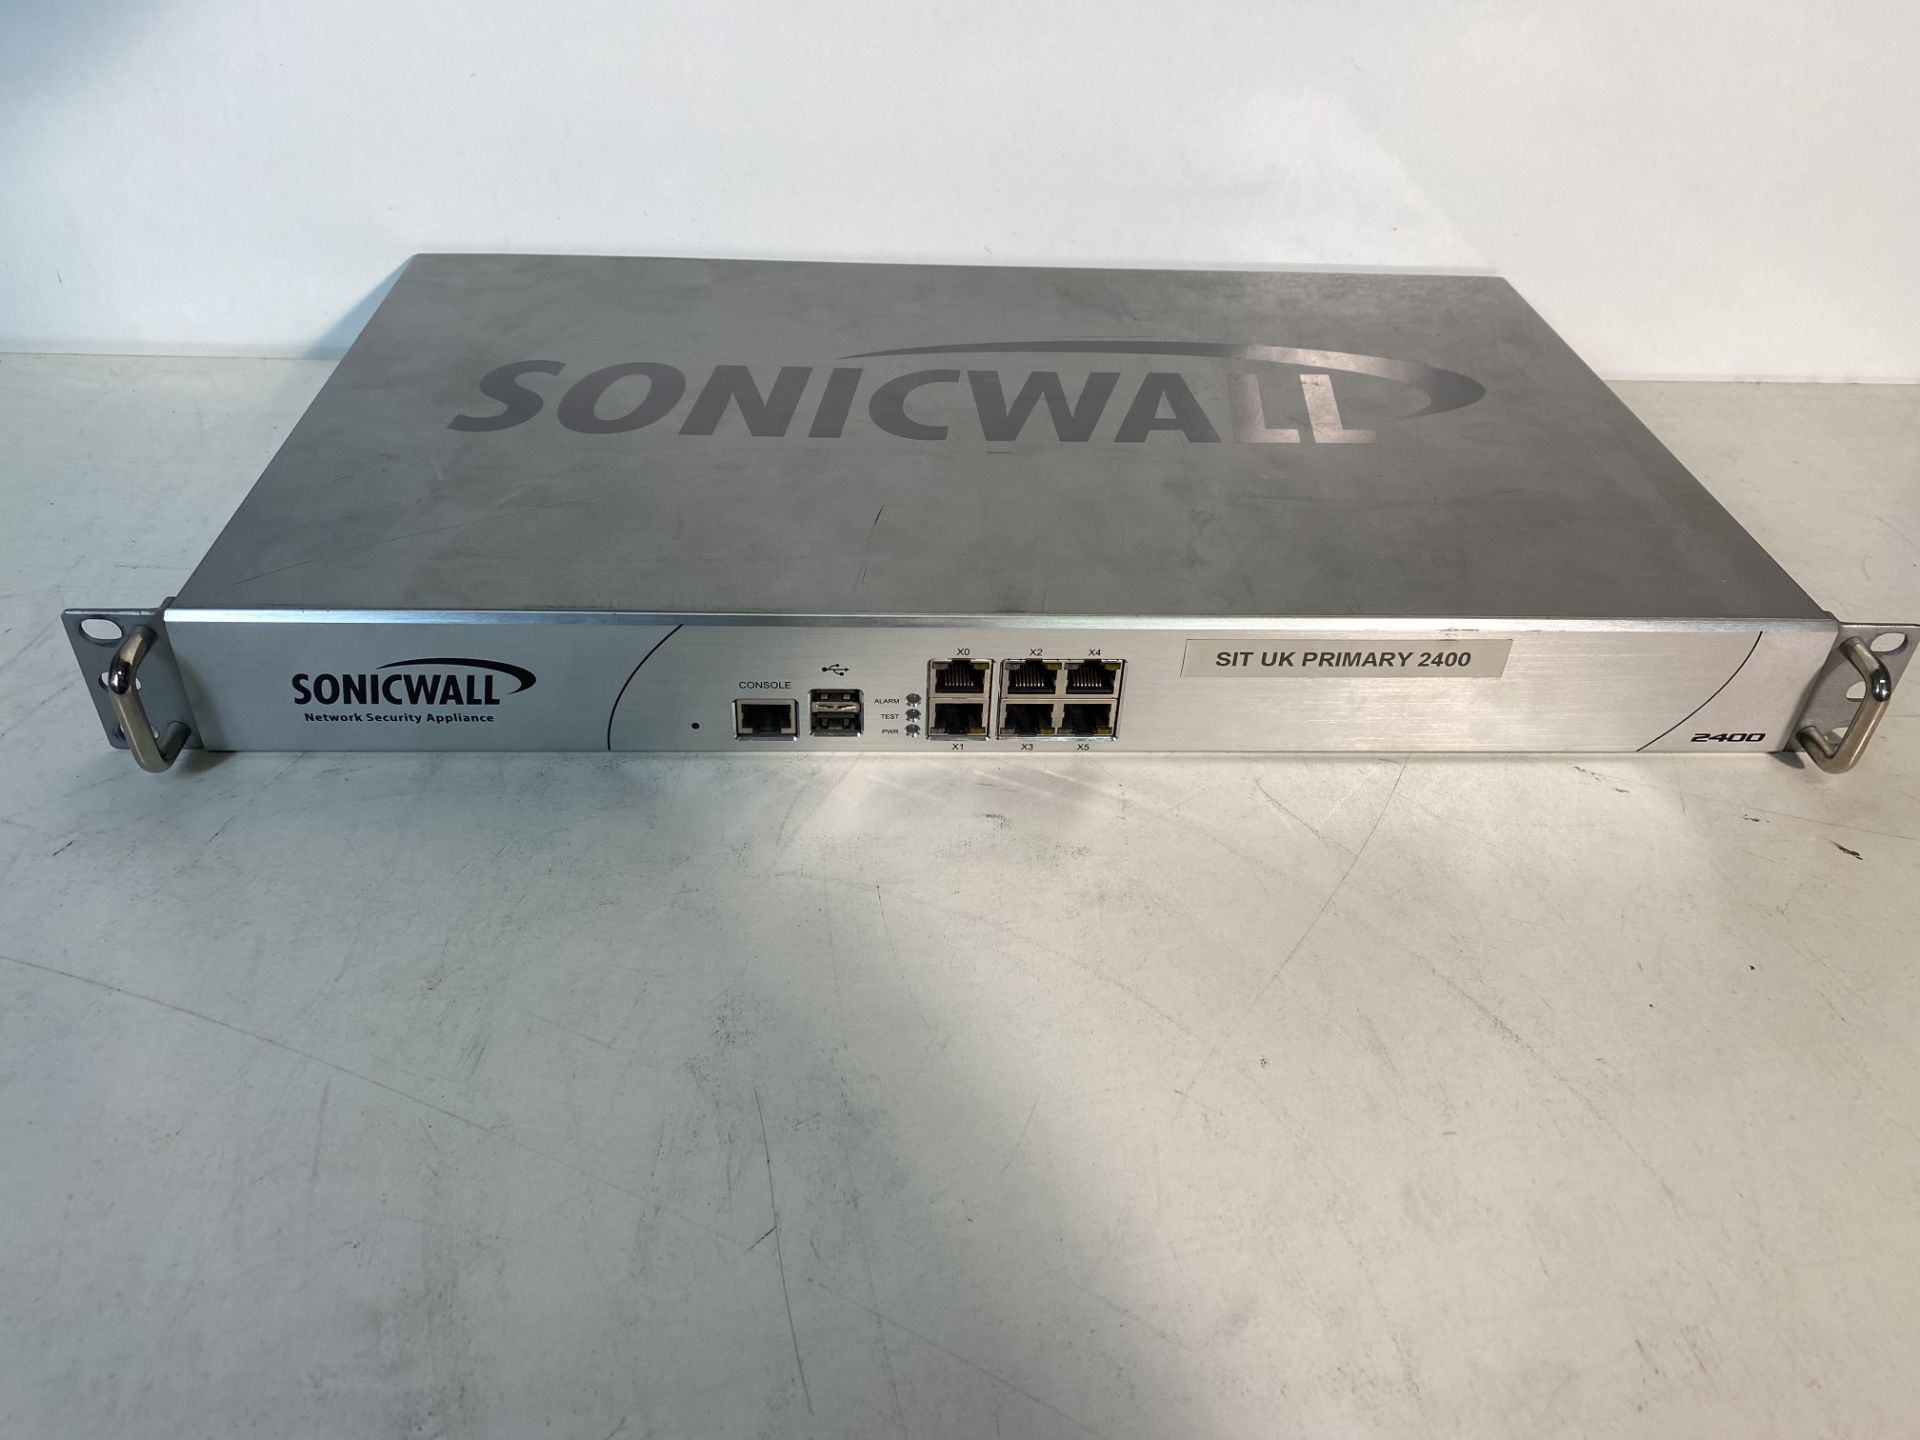 Sonicwall Network Security Appliance 2400 - Image 2 of 5